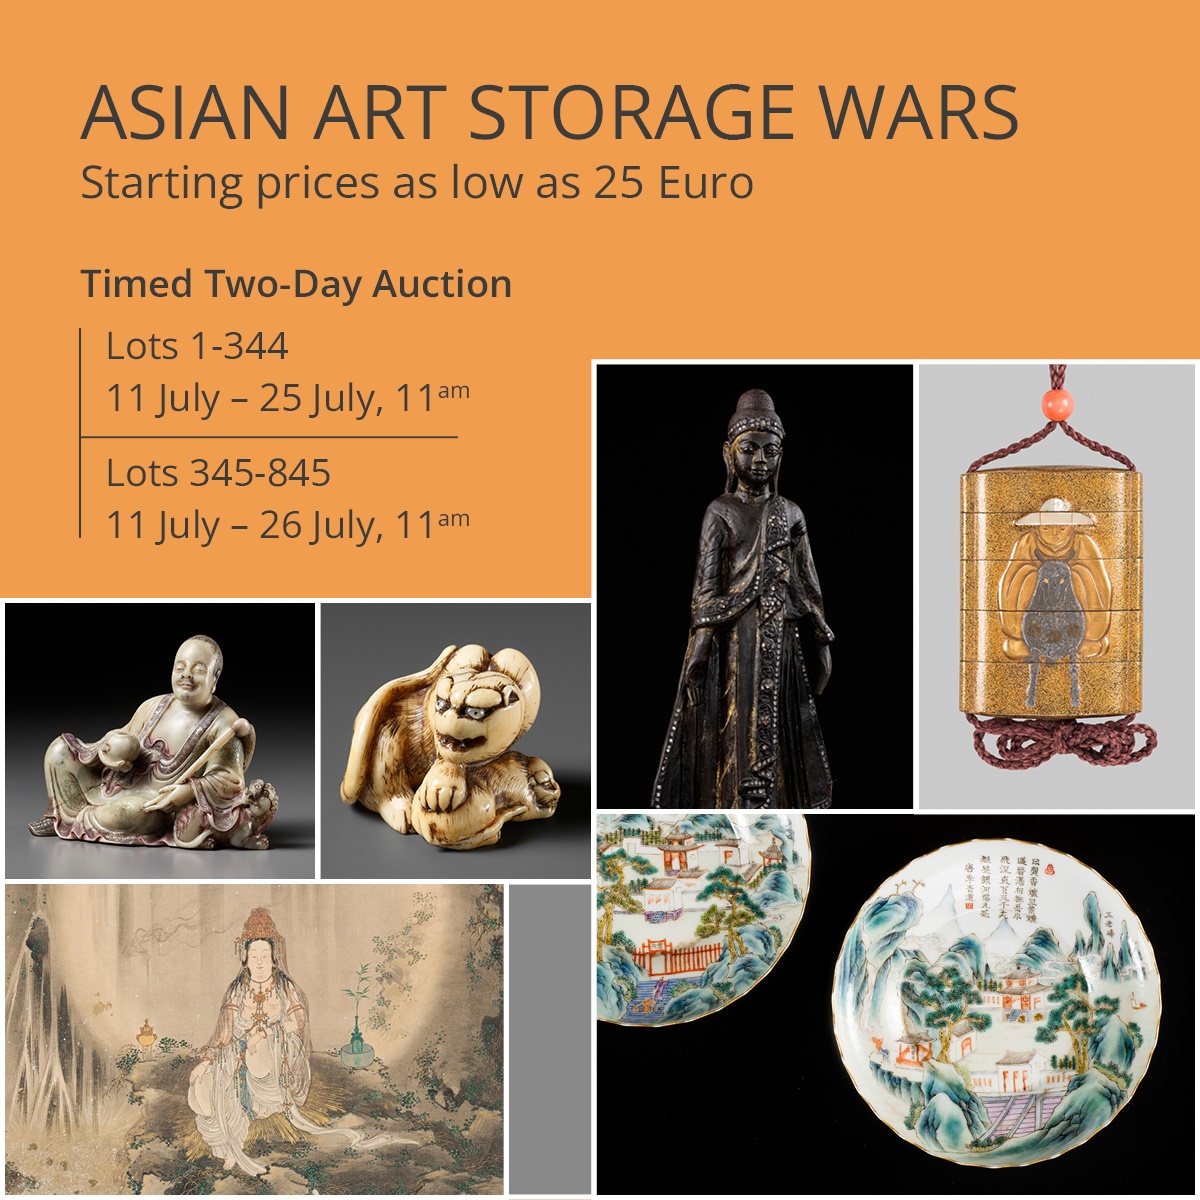 Timed Two-Day Auction: Asian Art Storage Wars